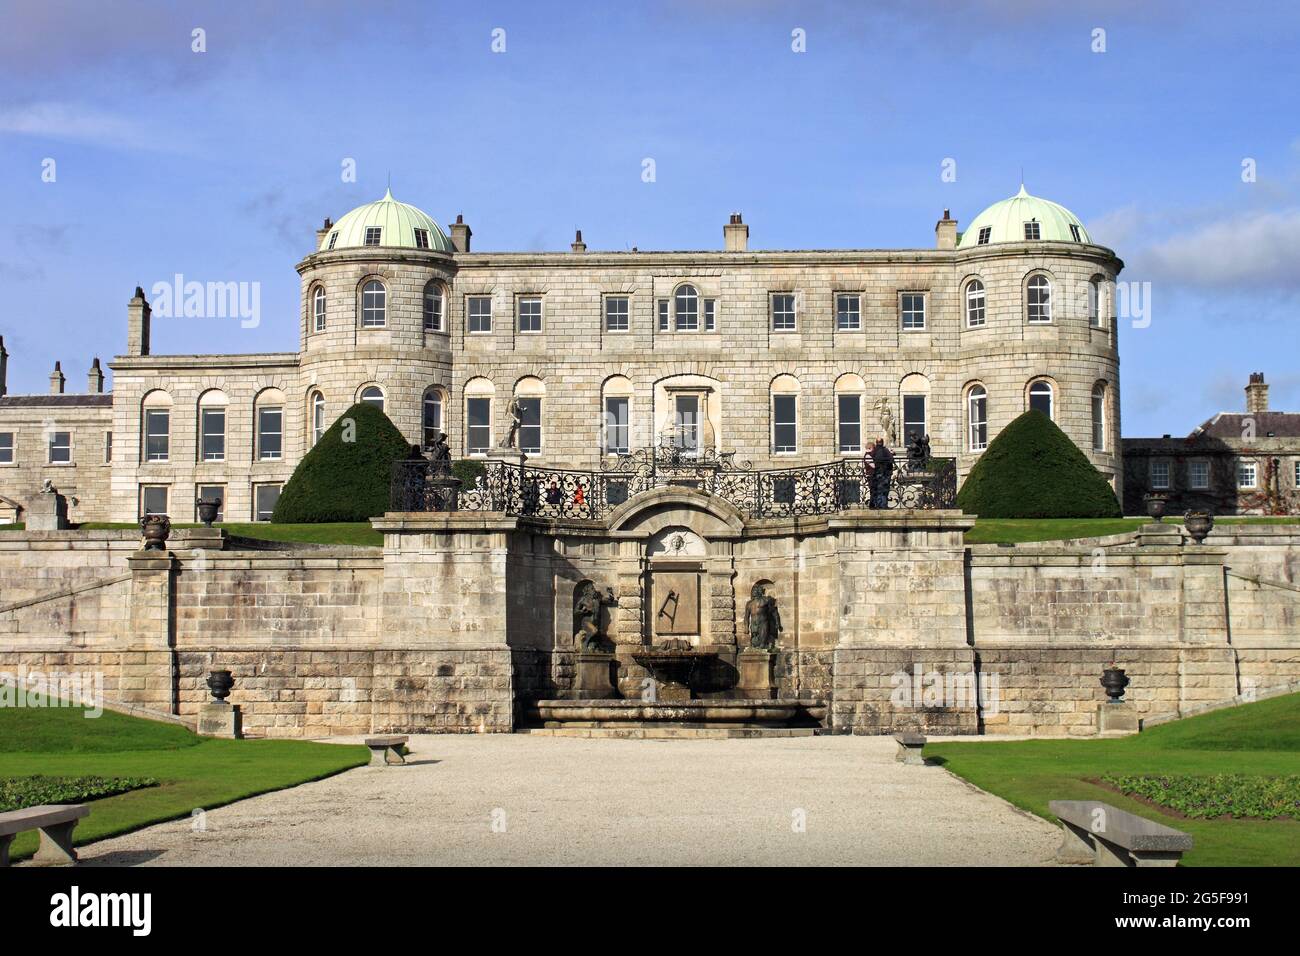 Powerscourt House is one of the most beautiful country estates in Ireland. Situated in the mountains of Wicklow. Stock Photo